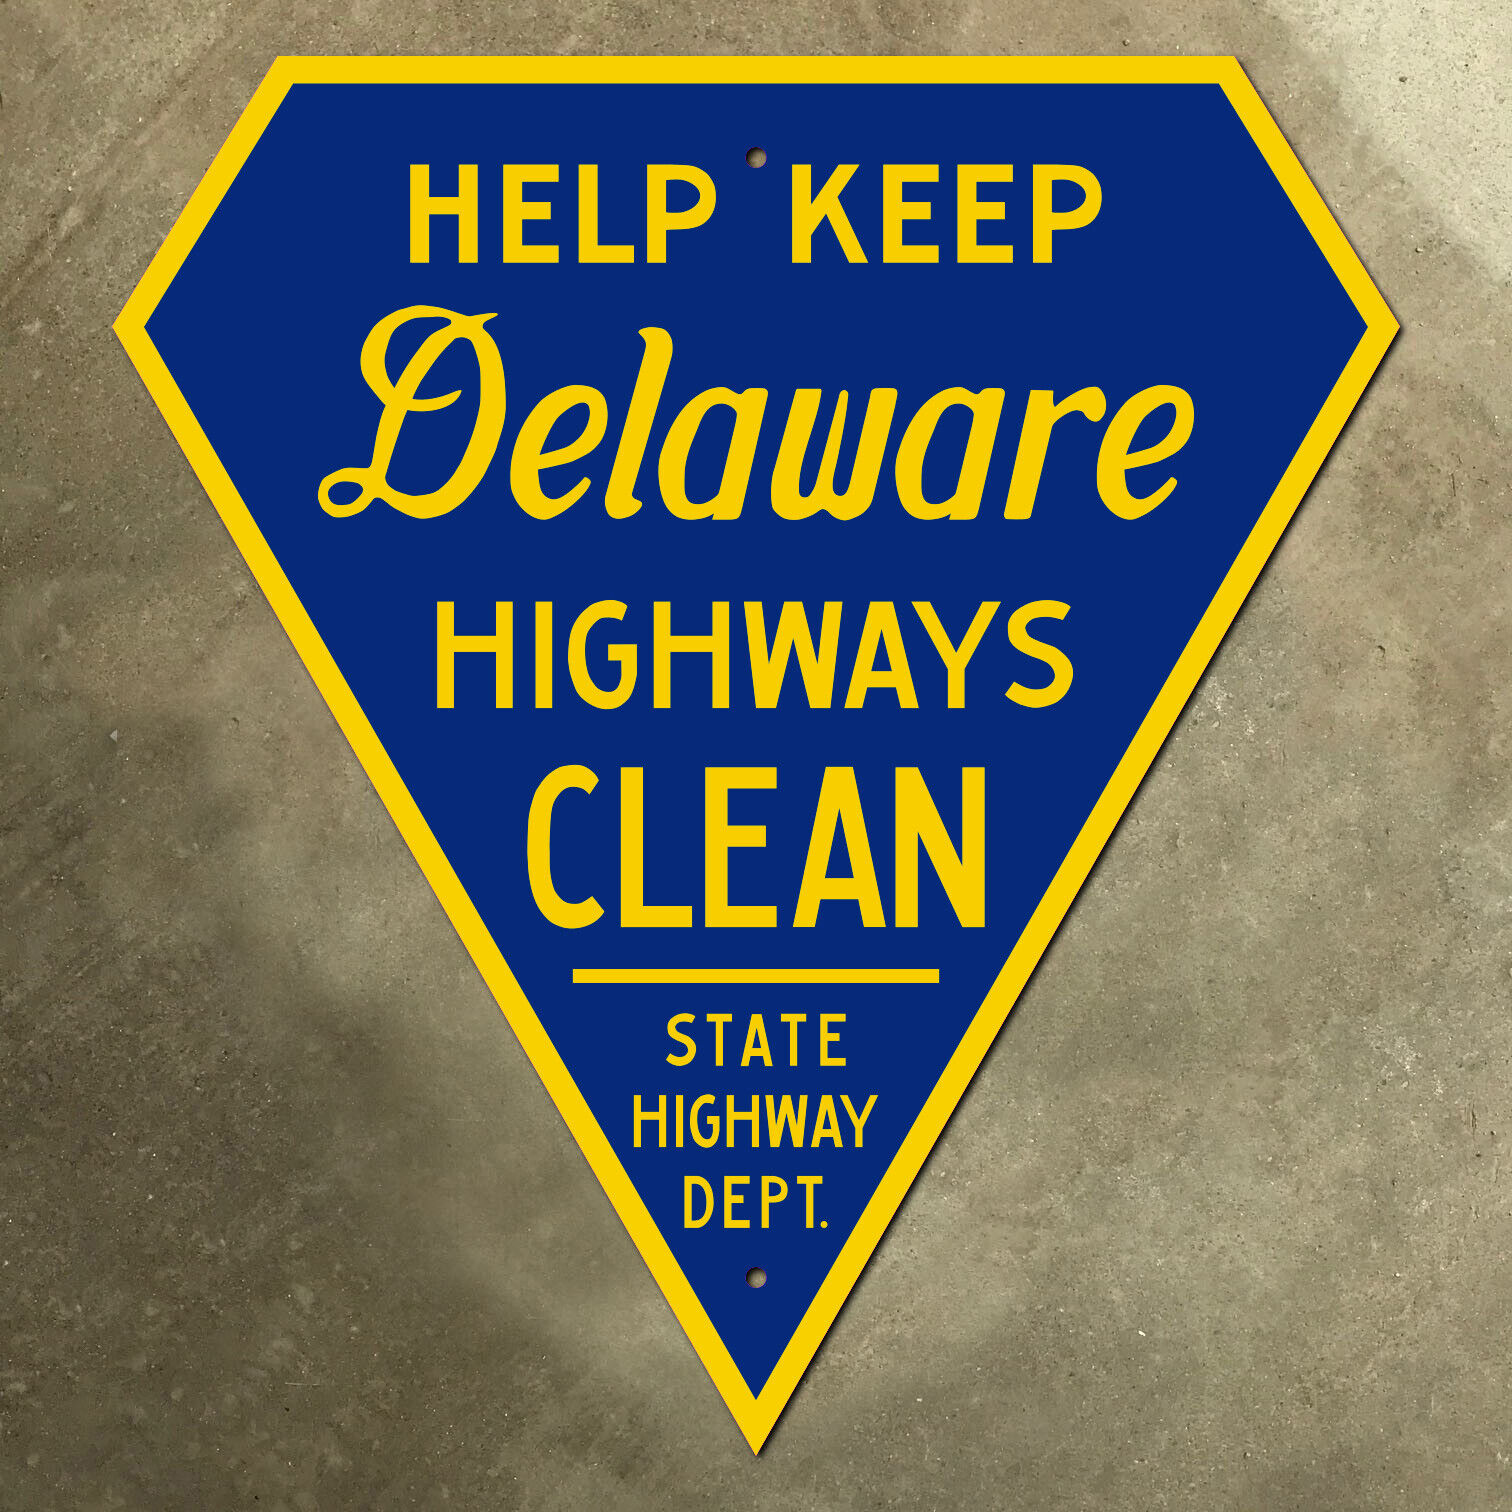 Delaware help keep highways clean marker road sign litter environment 23x25